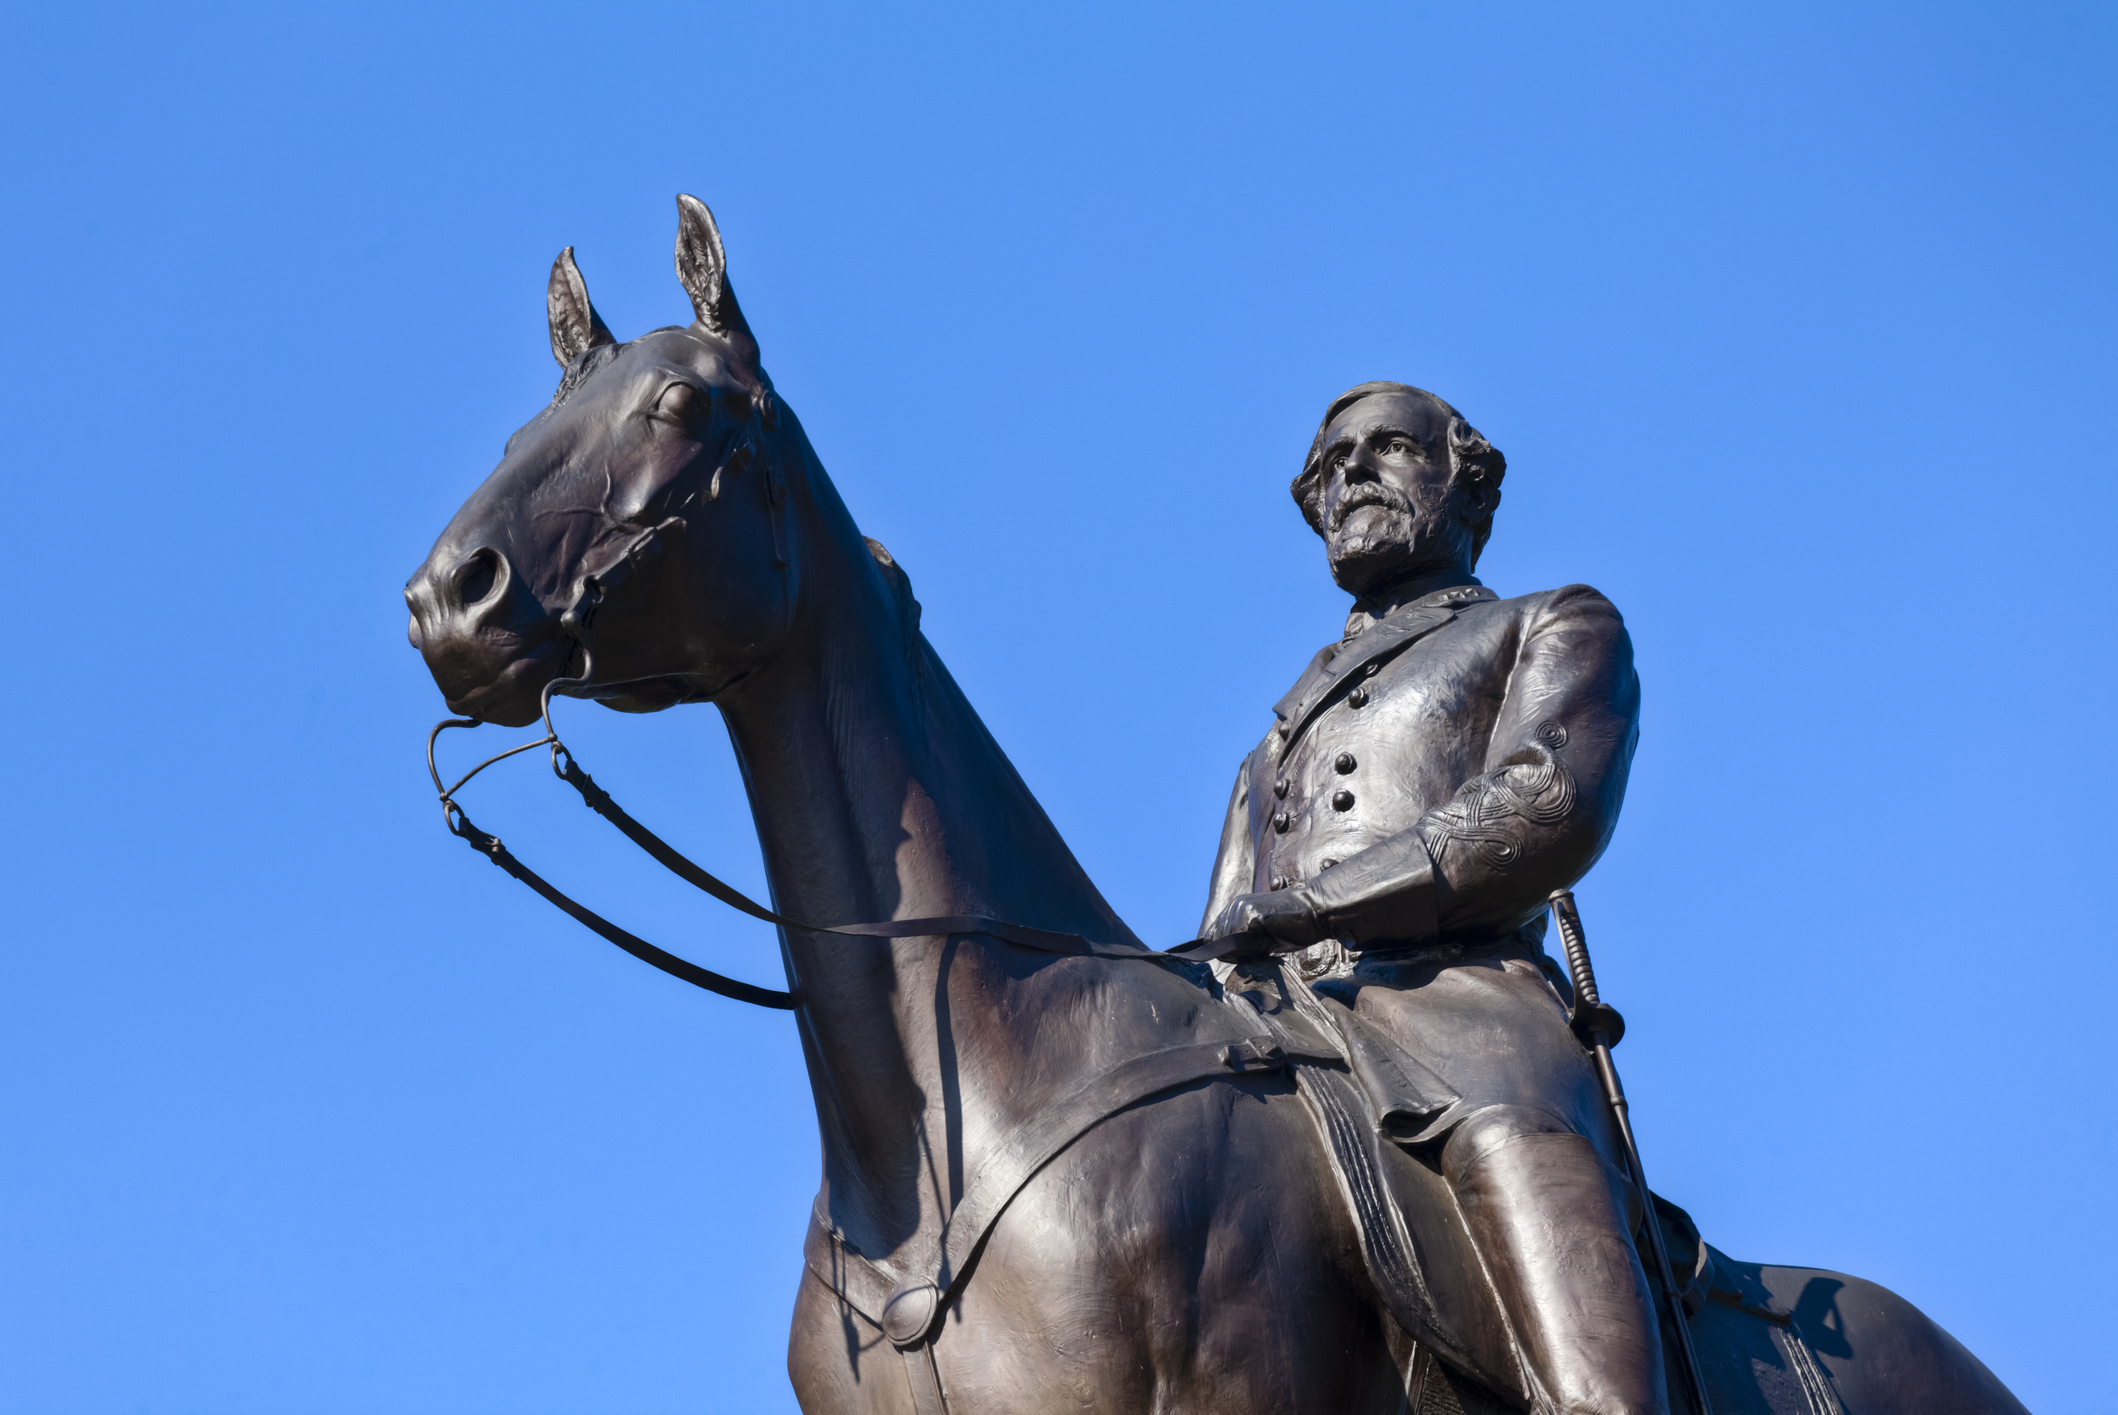 Statue destruction: A proxy in the war on American history.